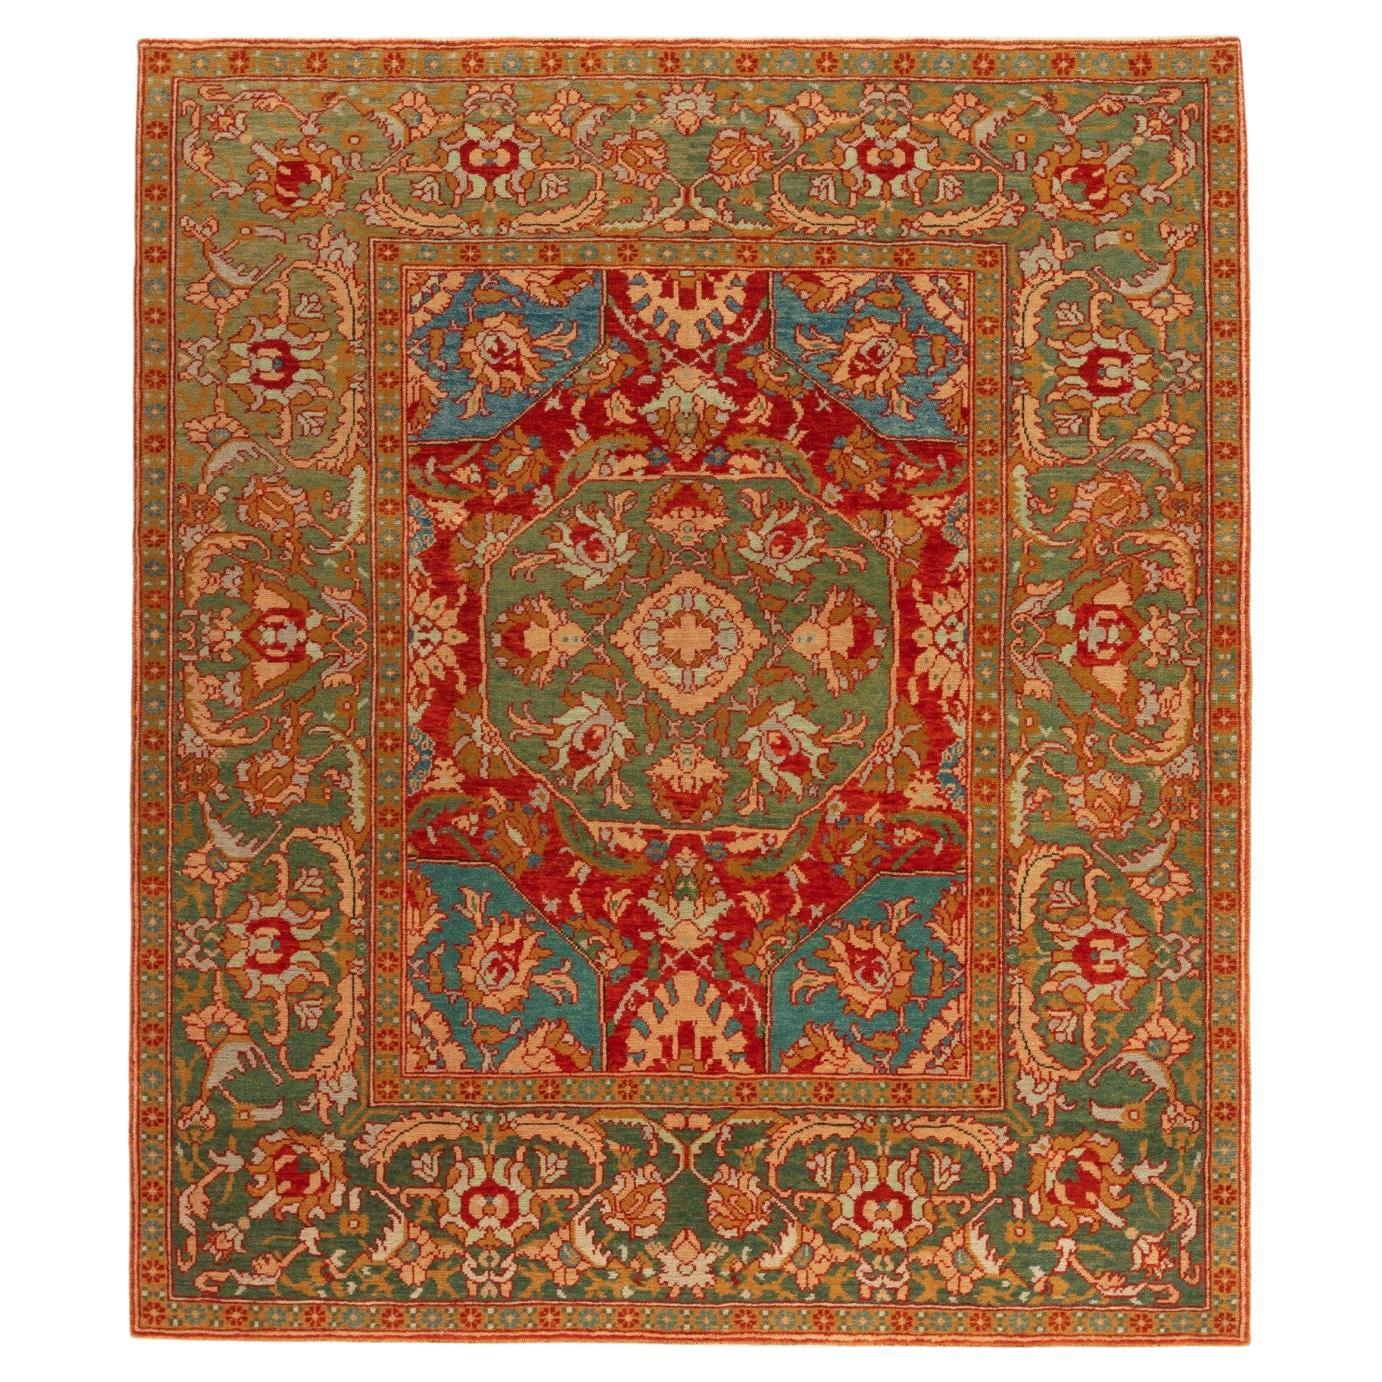 Ararat Rugs Cairene Ottoman Carpet, Turkish Court Manufactury Rug, Natural Dyed For Sale